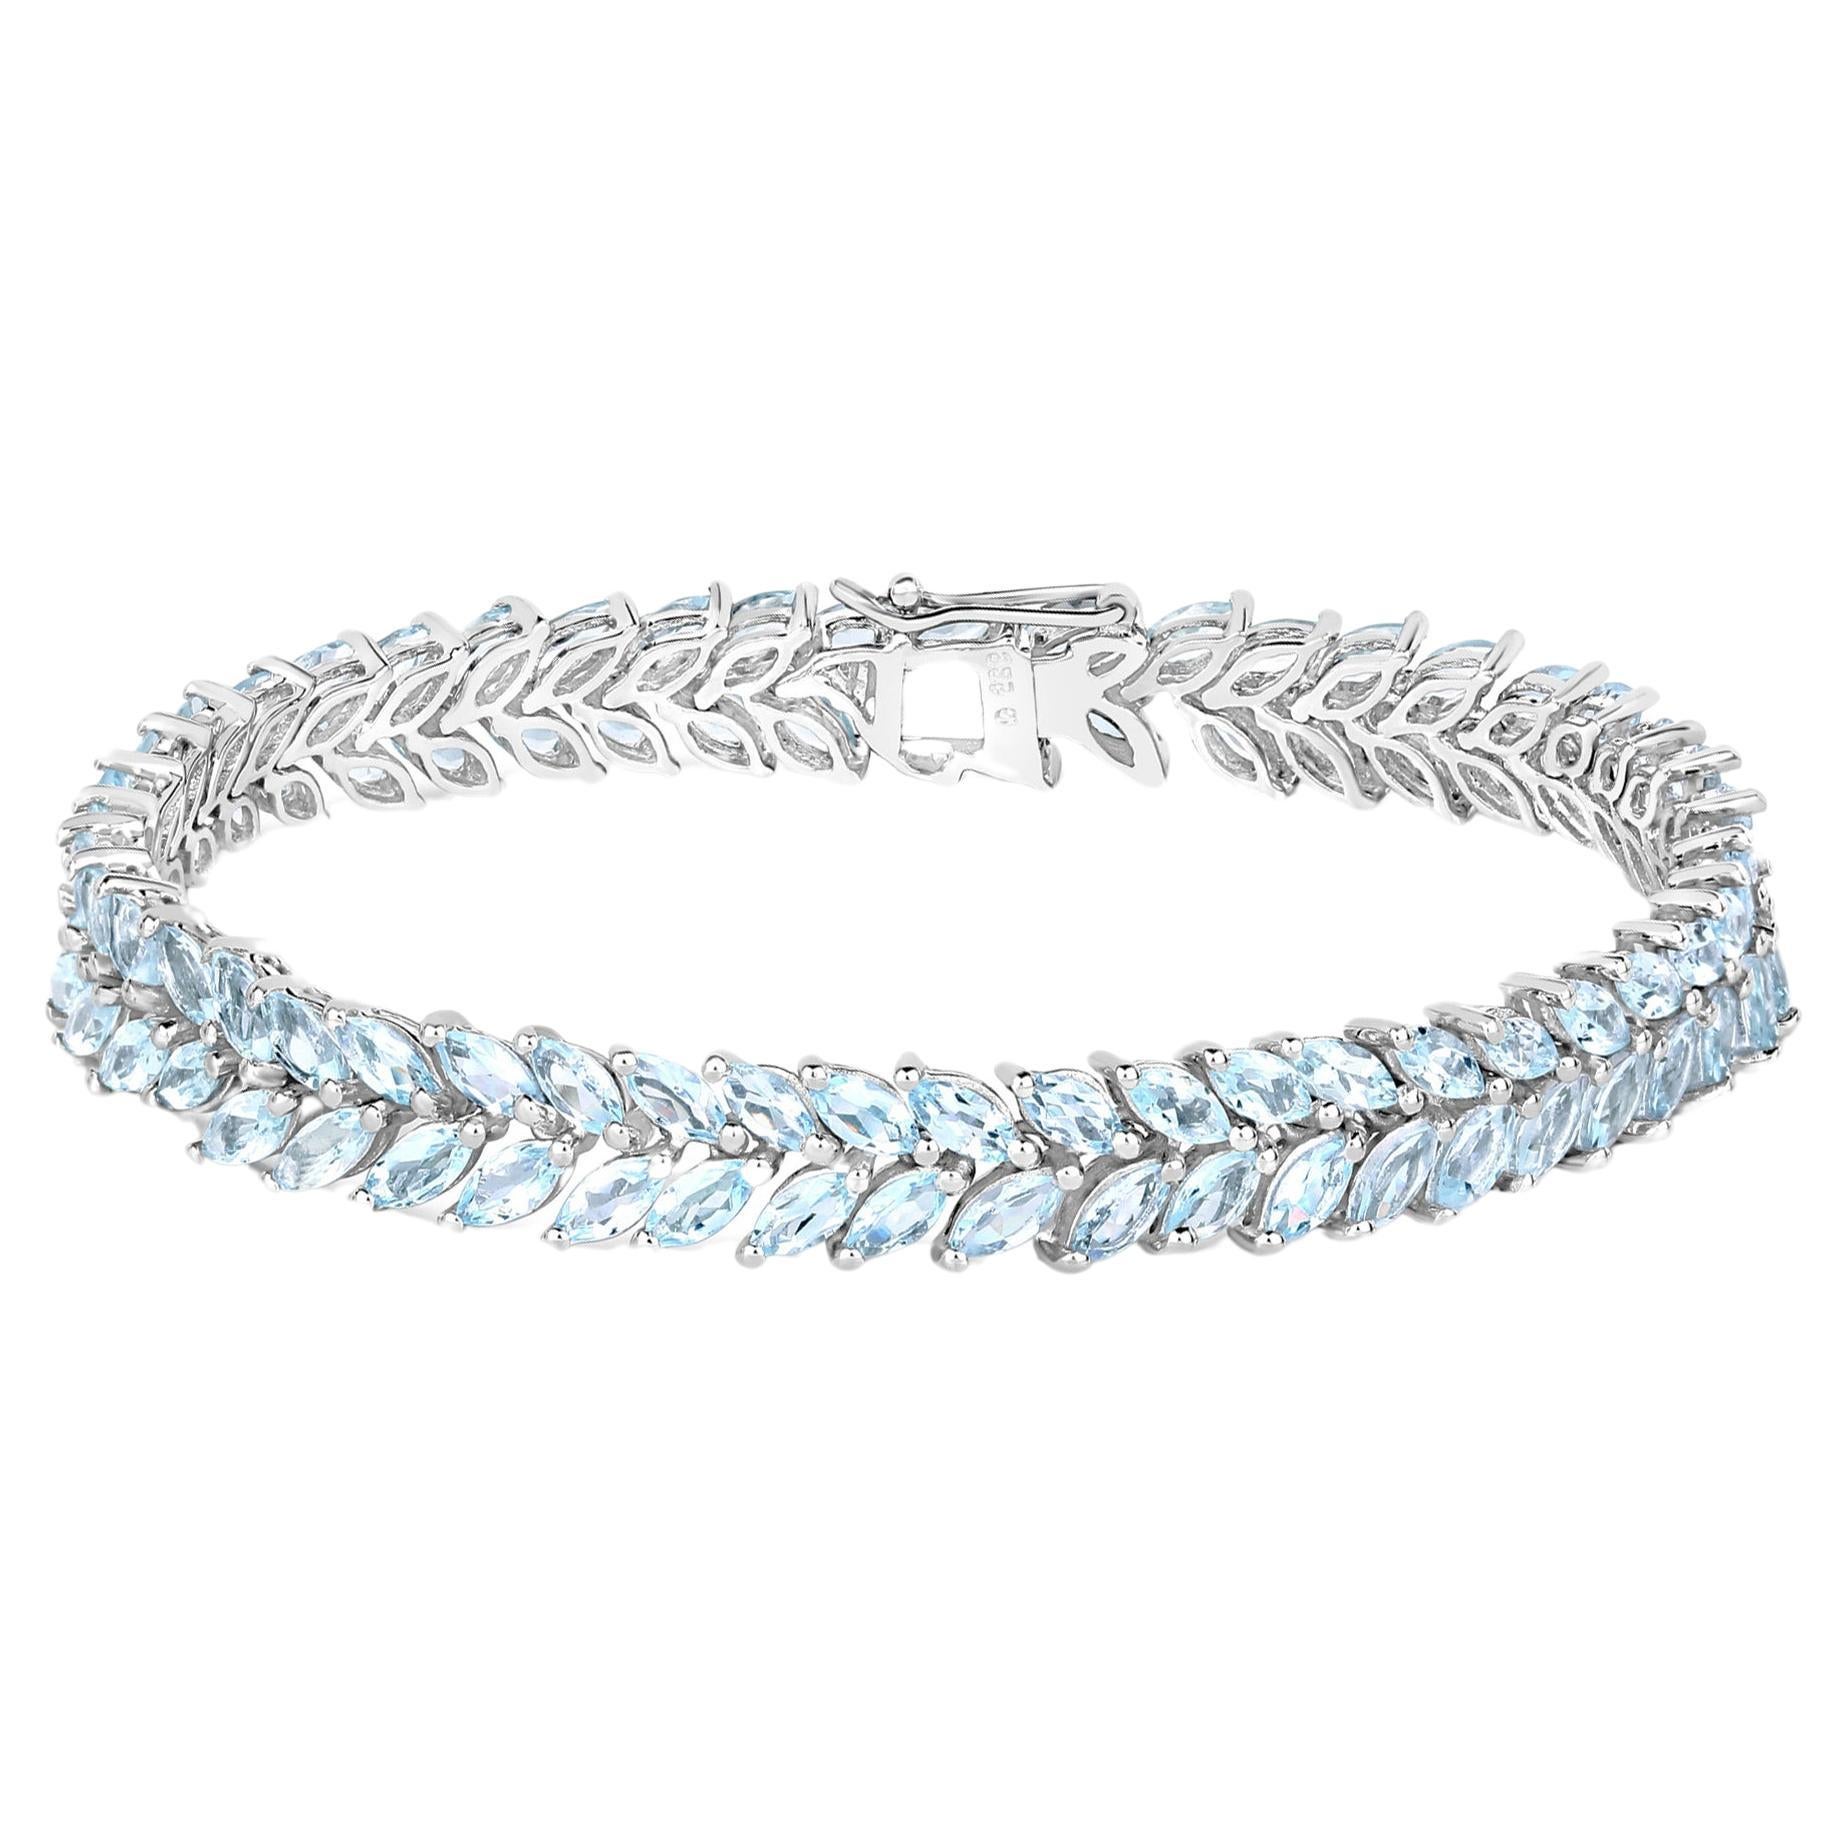 Marquise Cut Aquamarine Bracelet 10.12 Carats Sterling Silver For Sale